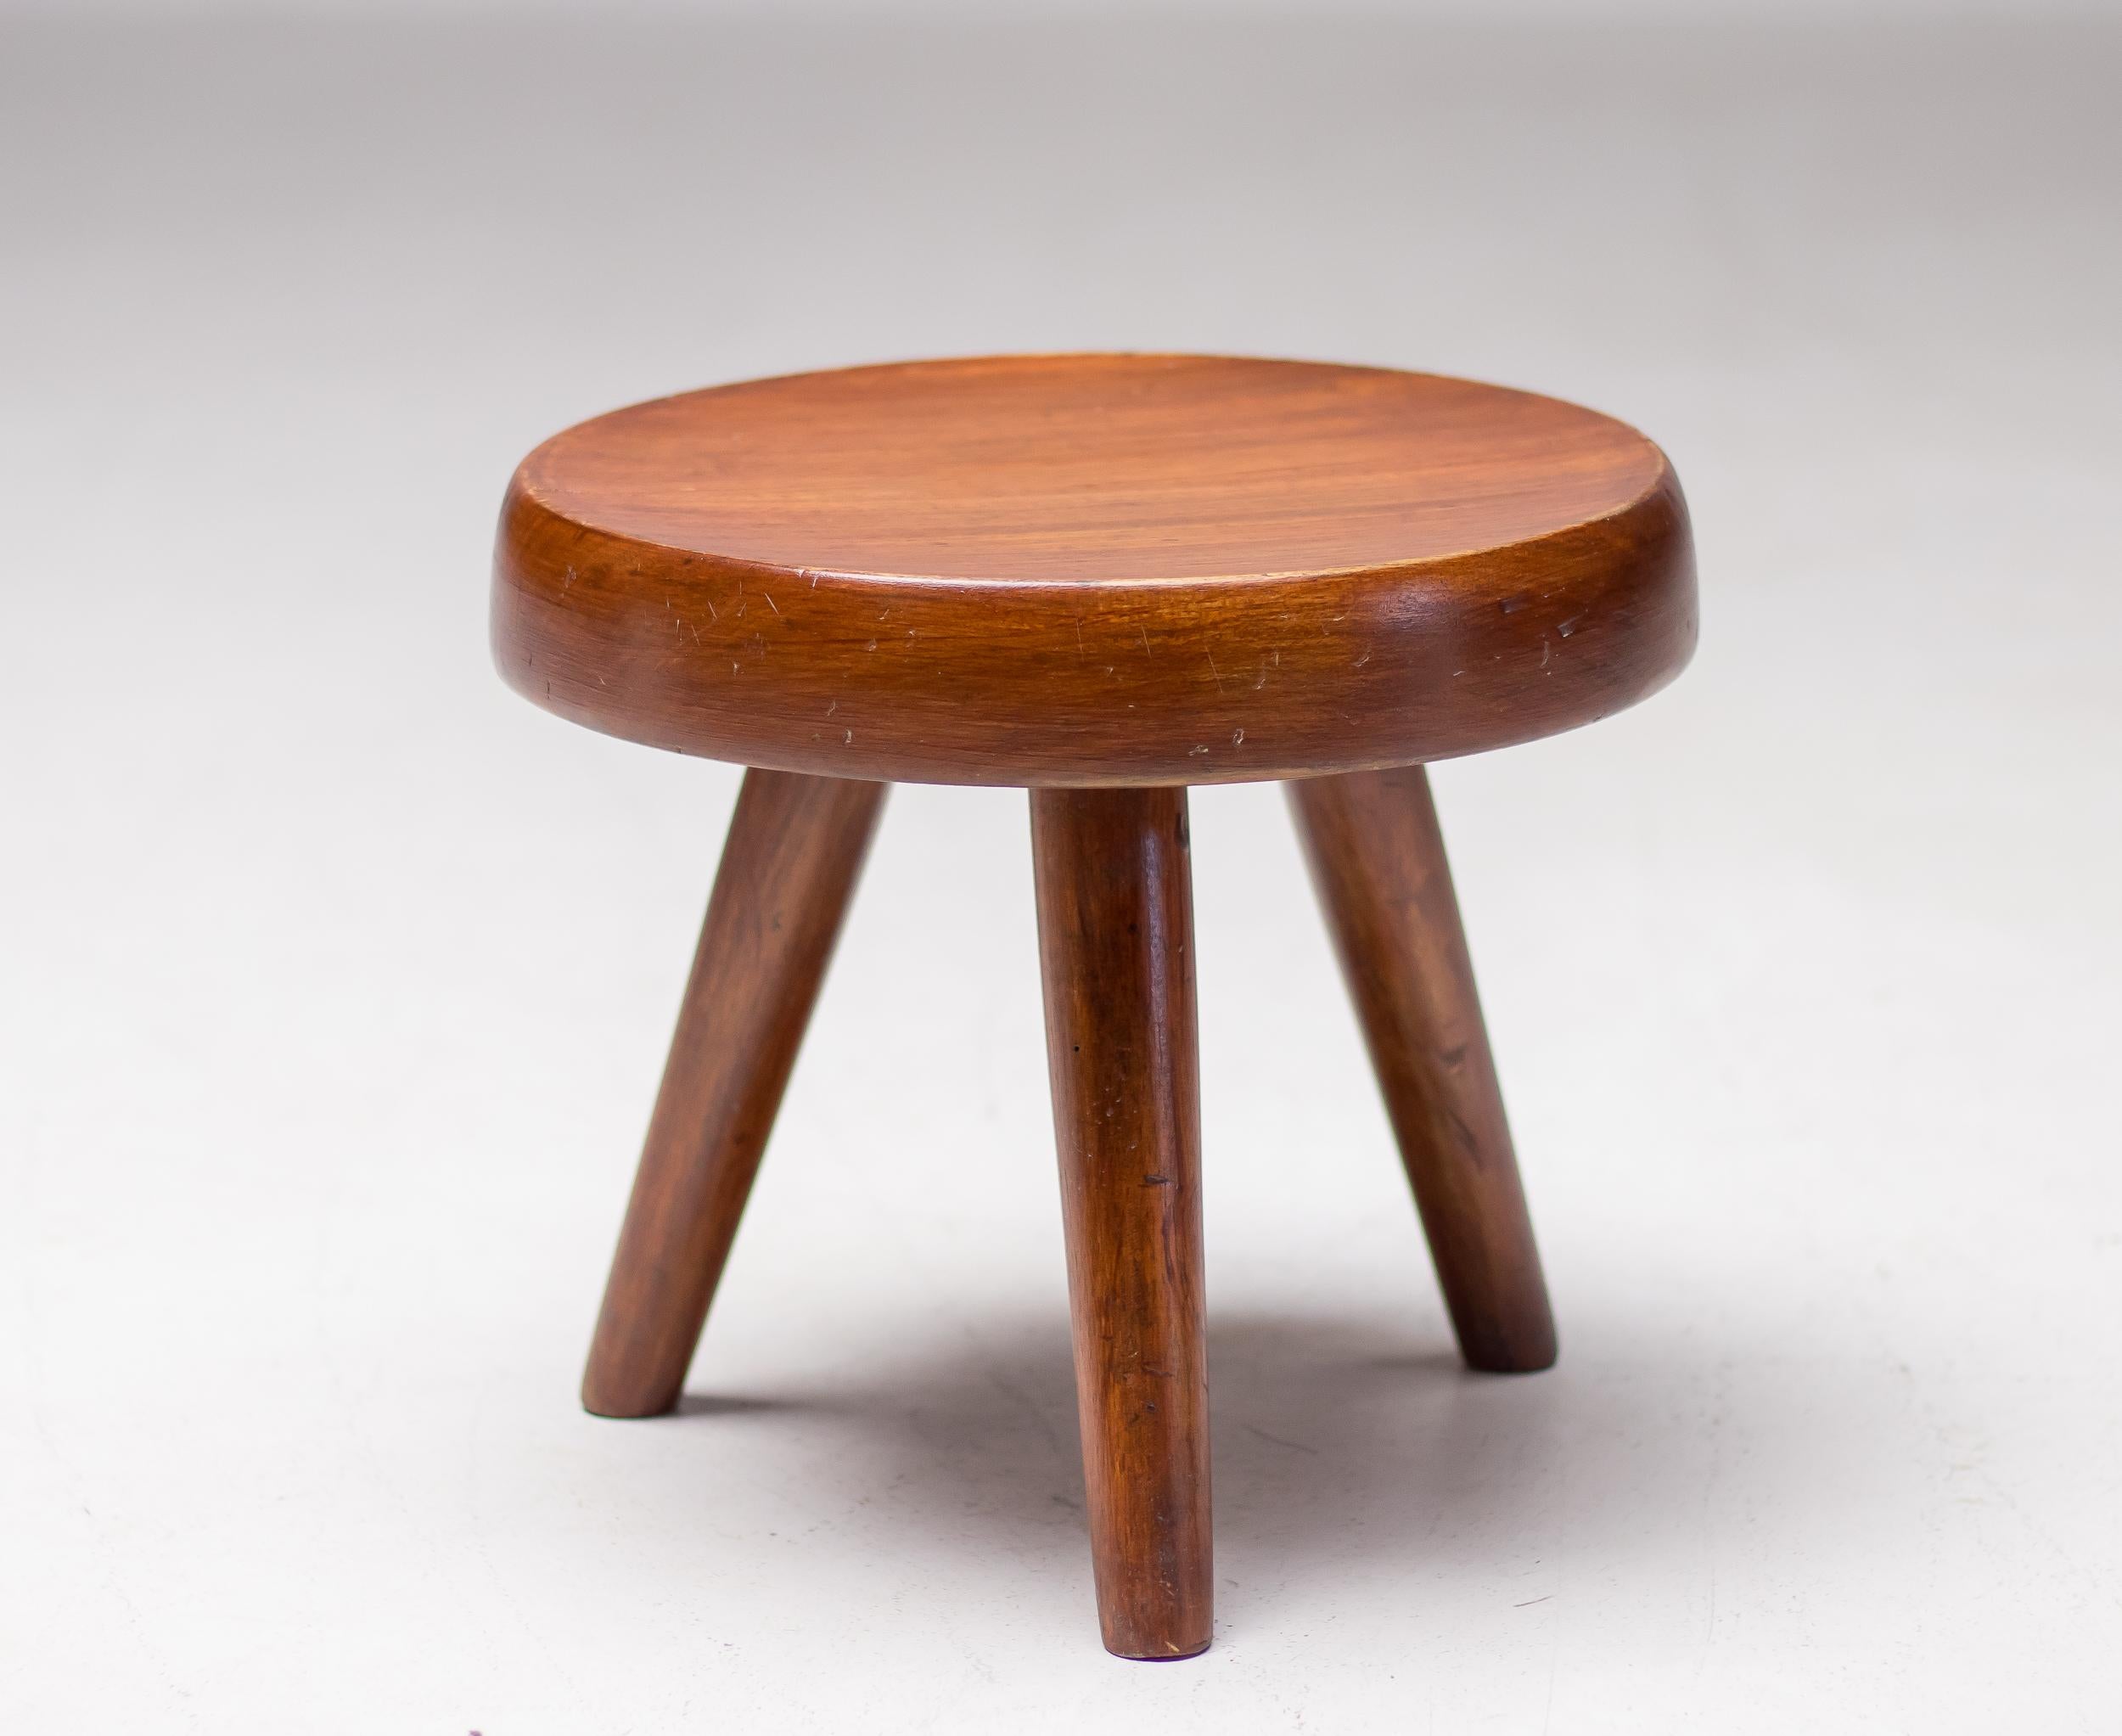 Original low stool or tabouret, known as the Berger Stool, designed by Charlotte Perriand. 
Inspired by pastoral mountain life, the design makes use of typical materials found in the Alps. Exquisitely handcrafted in mahogany using traditional